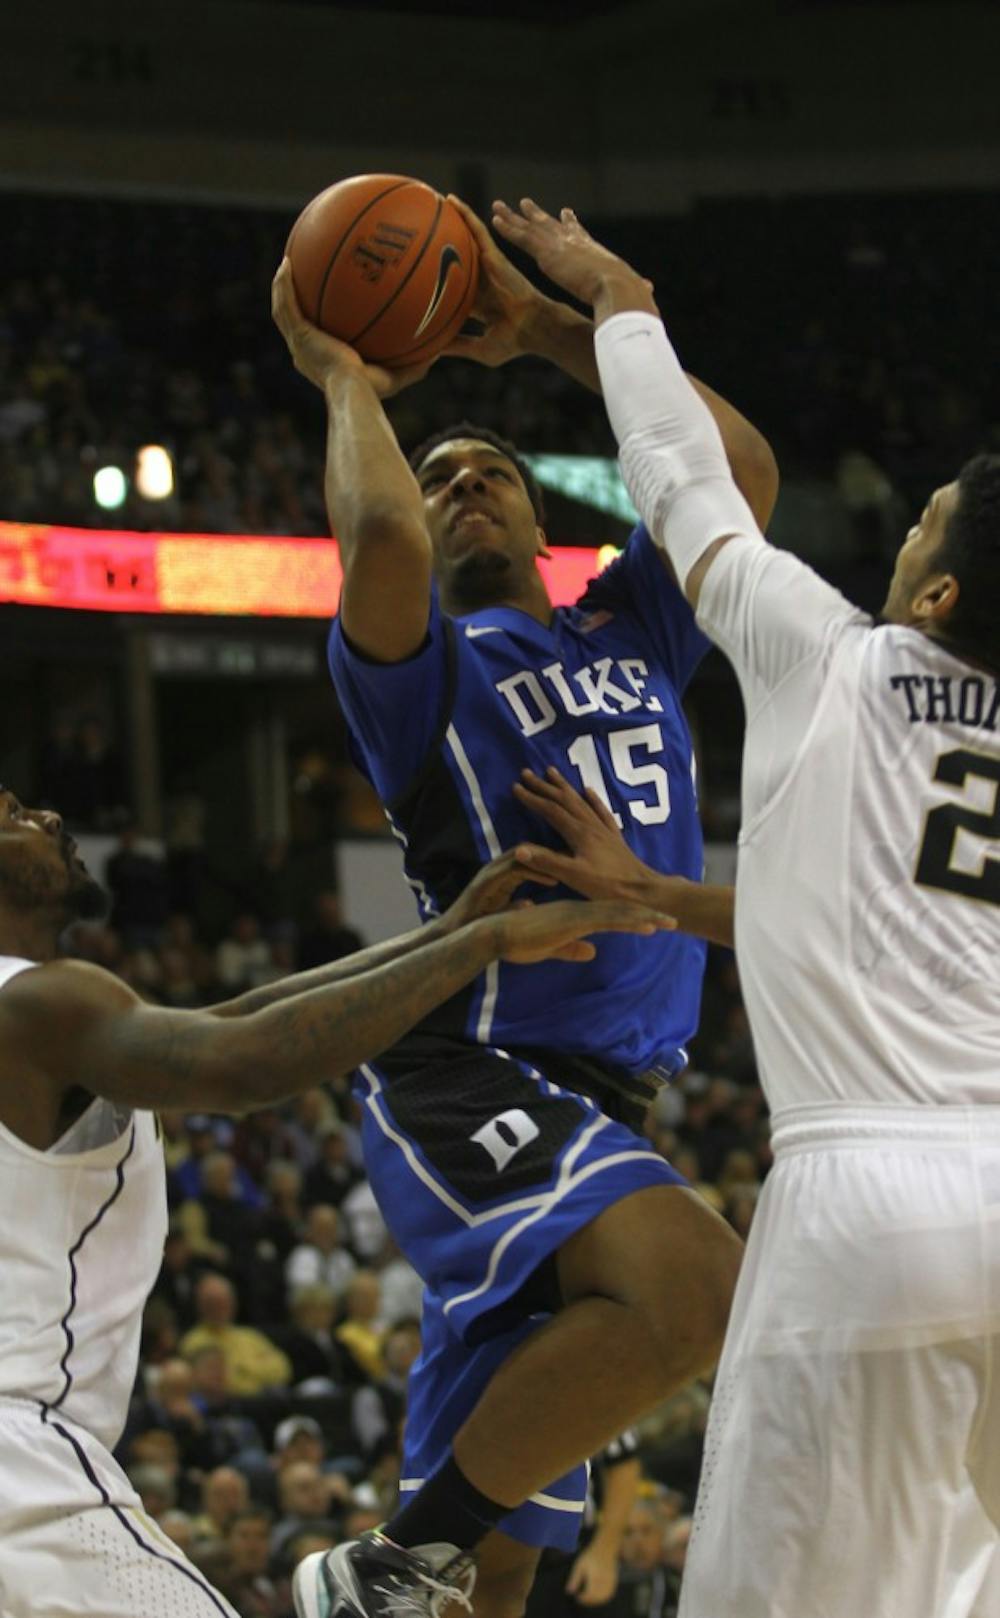 It was the first ACC road game for Jahlil Okafor and Duke's freshmen, but the team's veterans came through in the clutch to avenge last season's loss to Wake Forest.